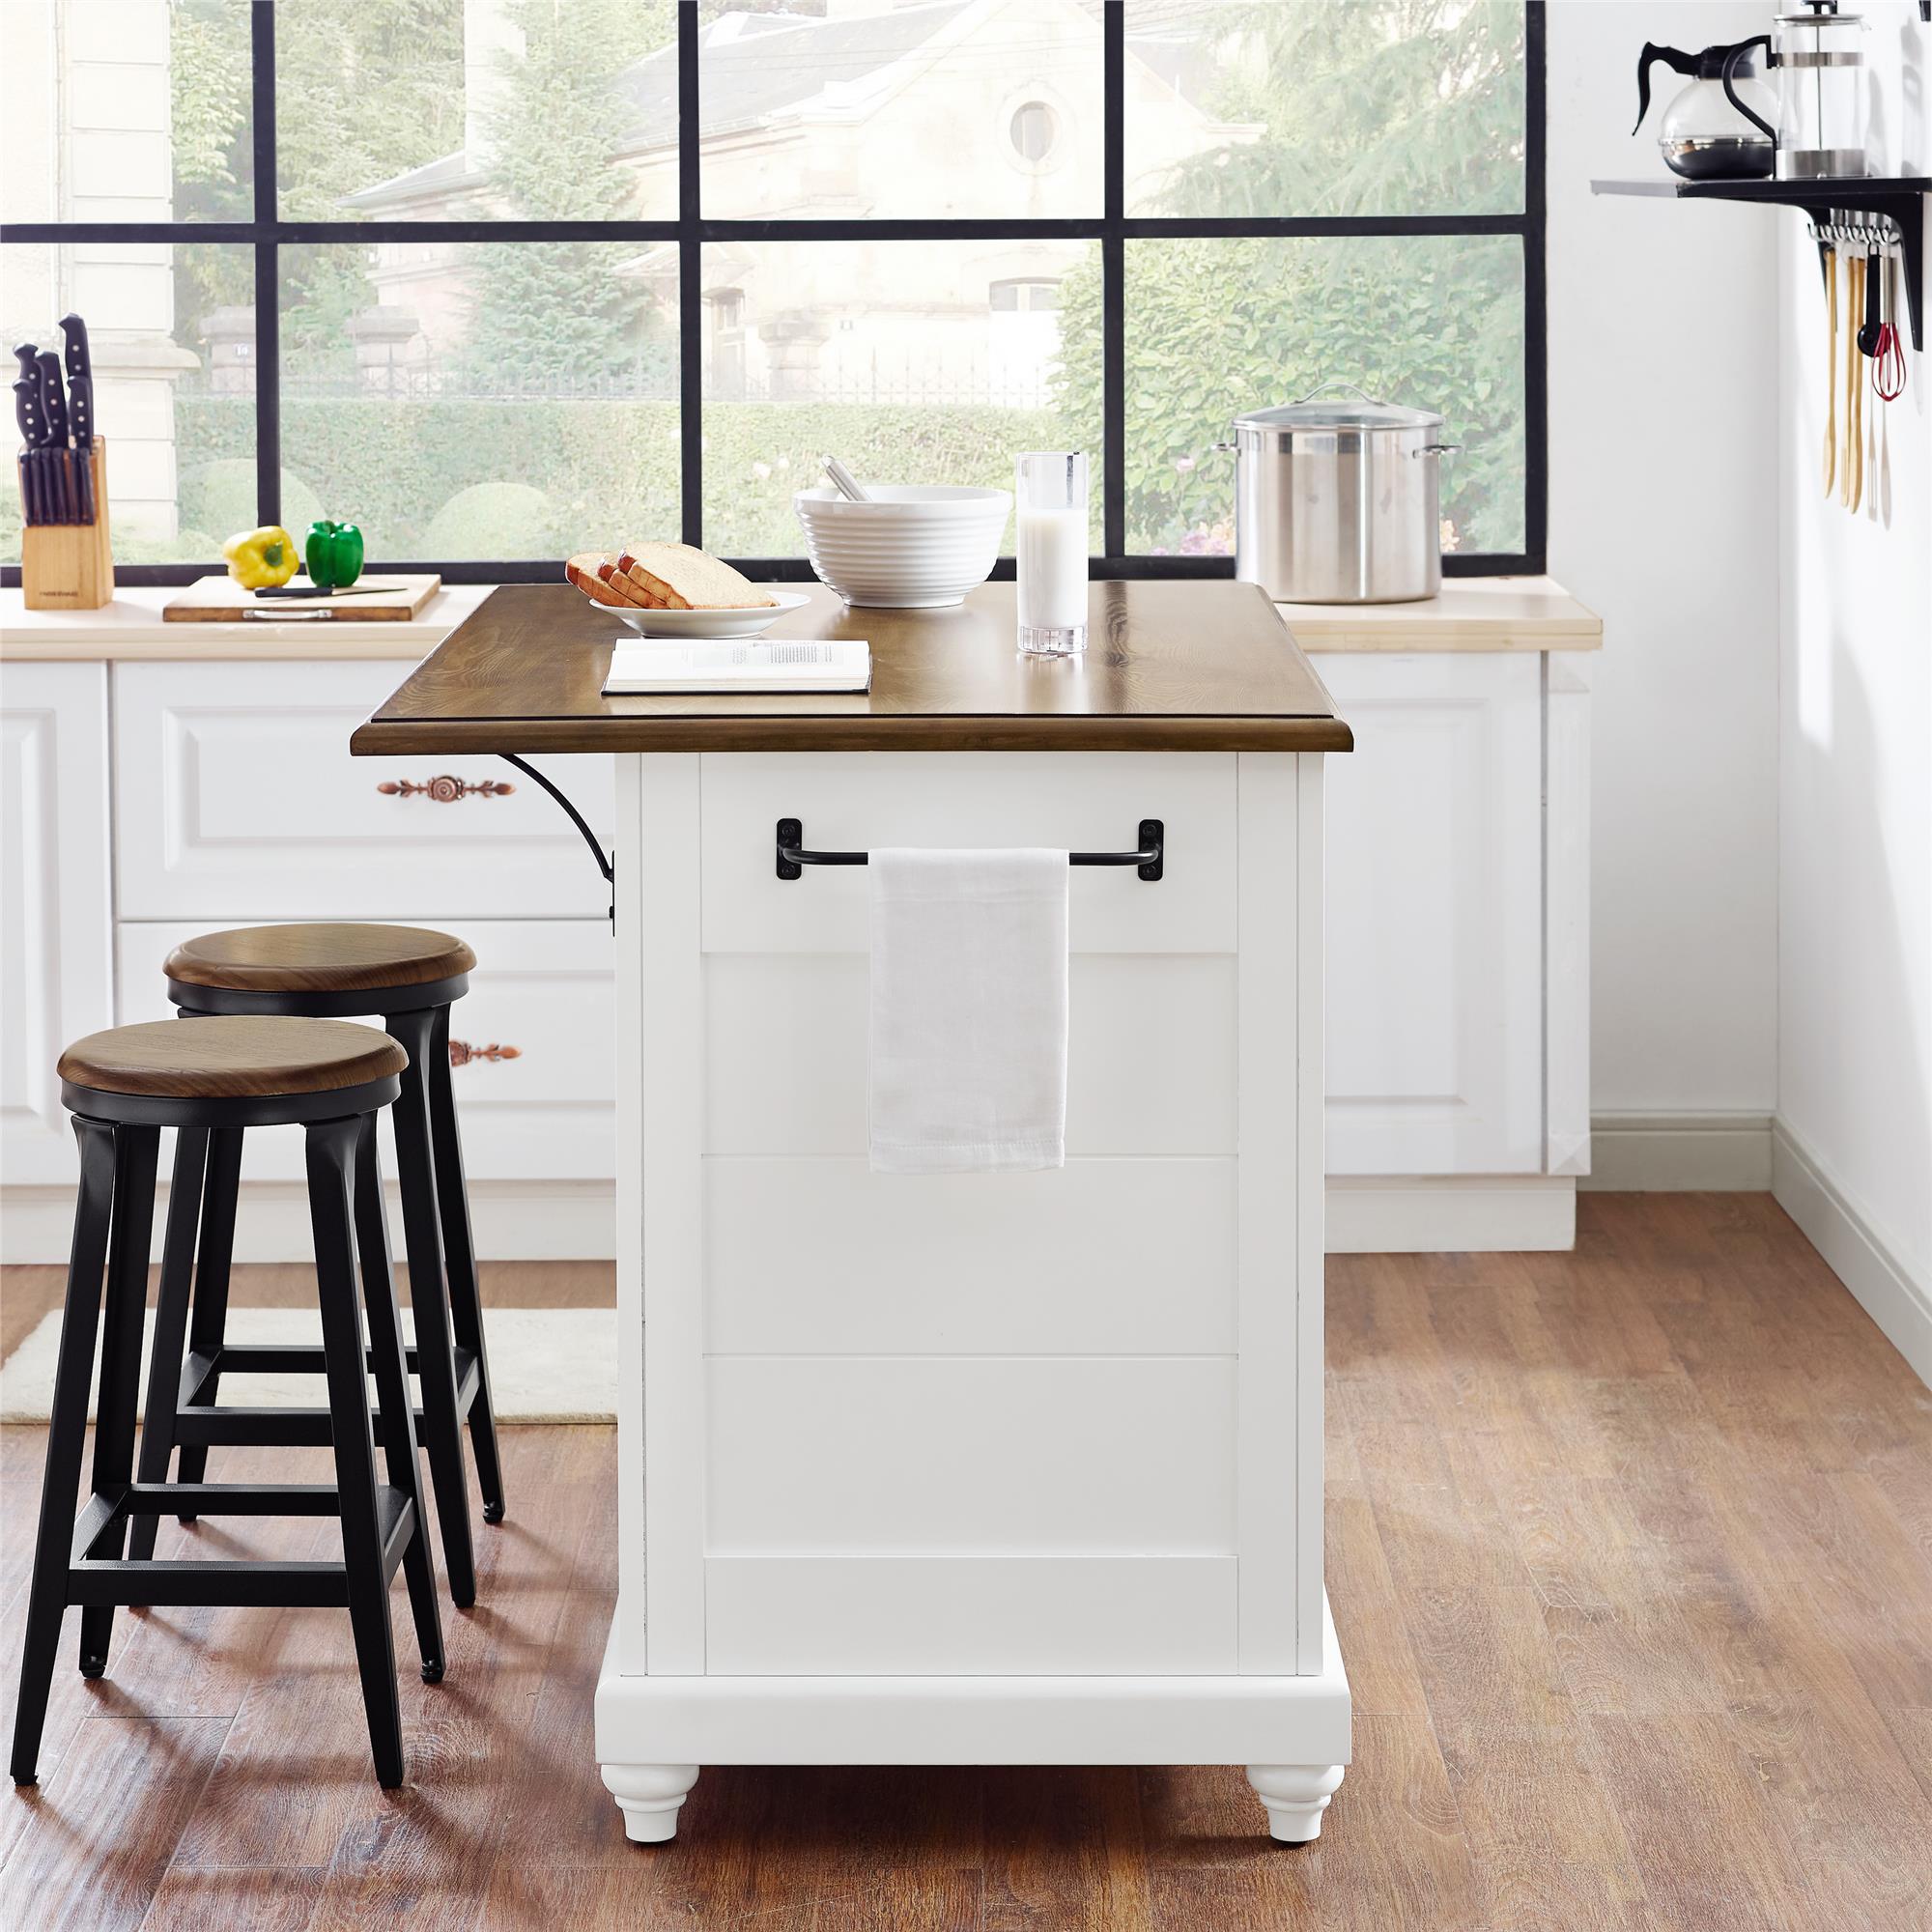 Dorel Home Furnishings Kelsey White Kitchen Island with 2 Stools